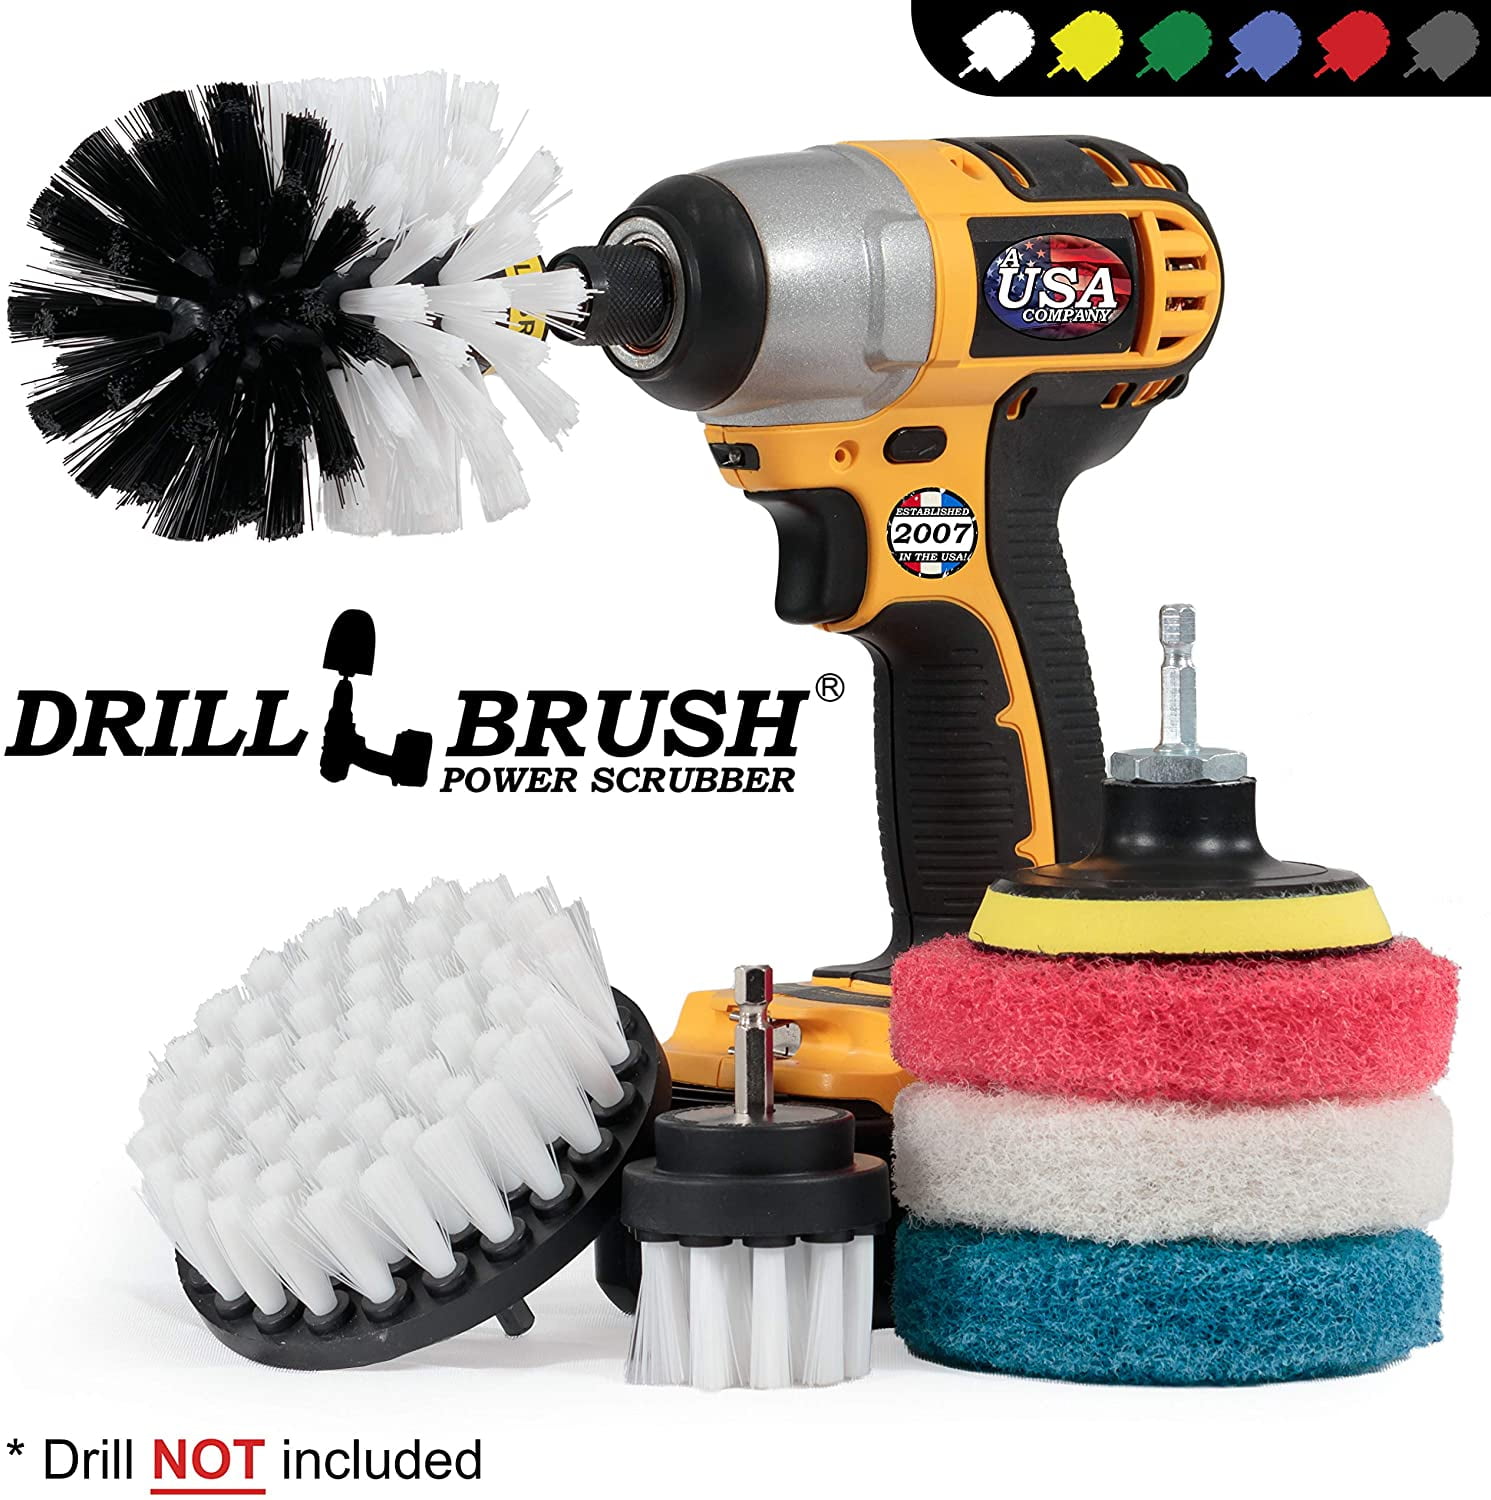 ProSMF Drill Brush Set - Scrub Brush Attachments for Drill - Power Scrubber Cleaning Brushes - Kitchen - Cabinets - Stove - Oven